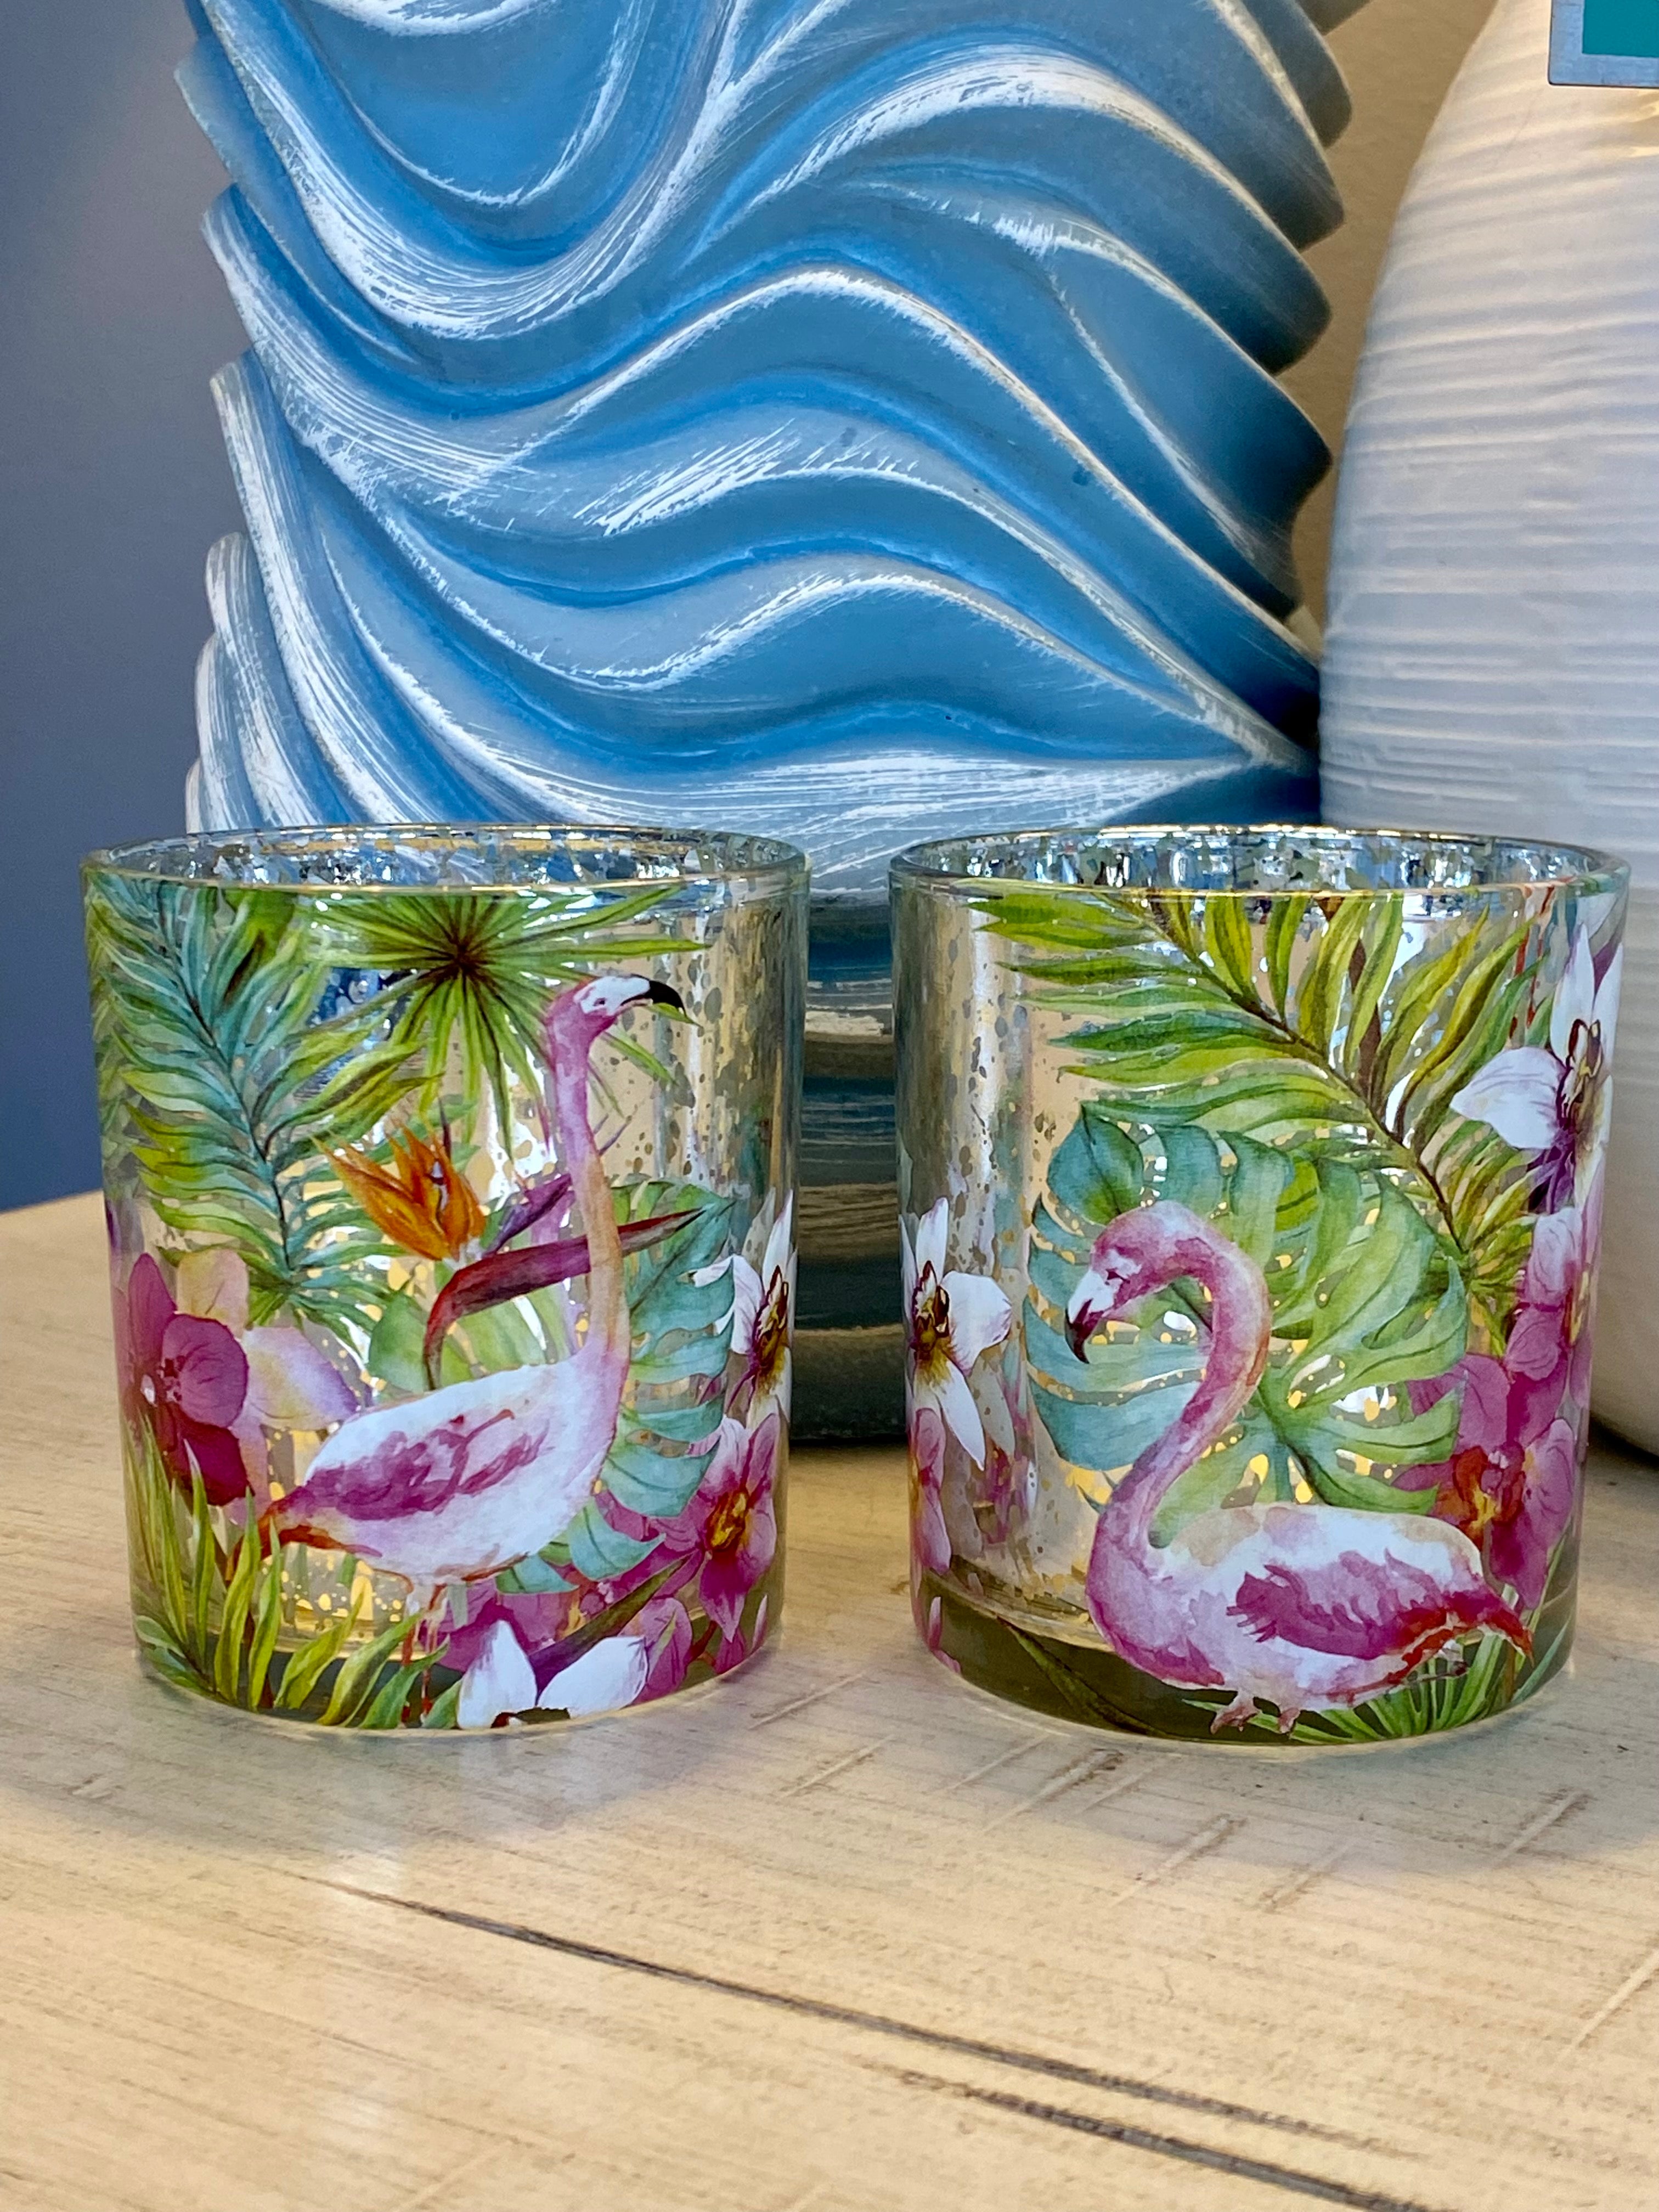 FlaminGO LOVE Pair - ONLY ONE PAIR AVAILABLE